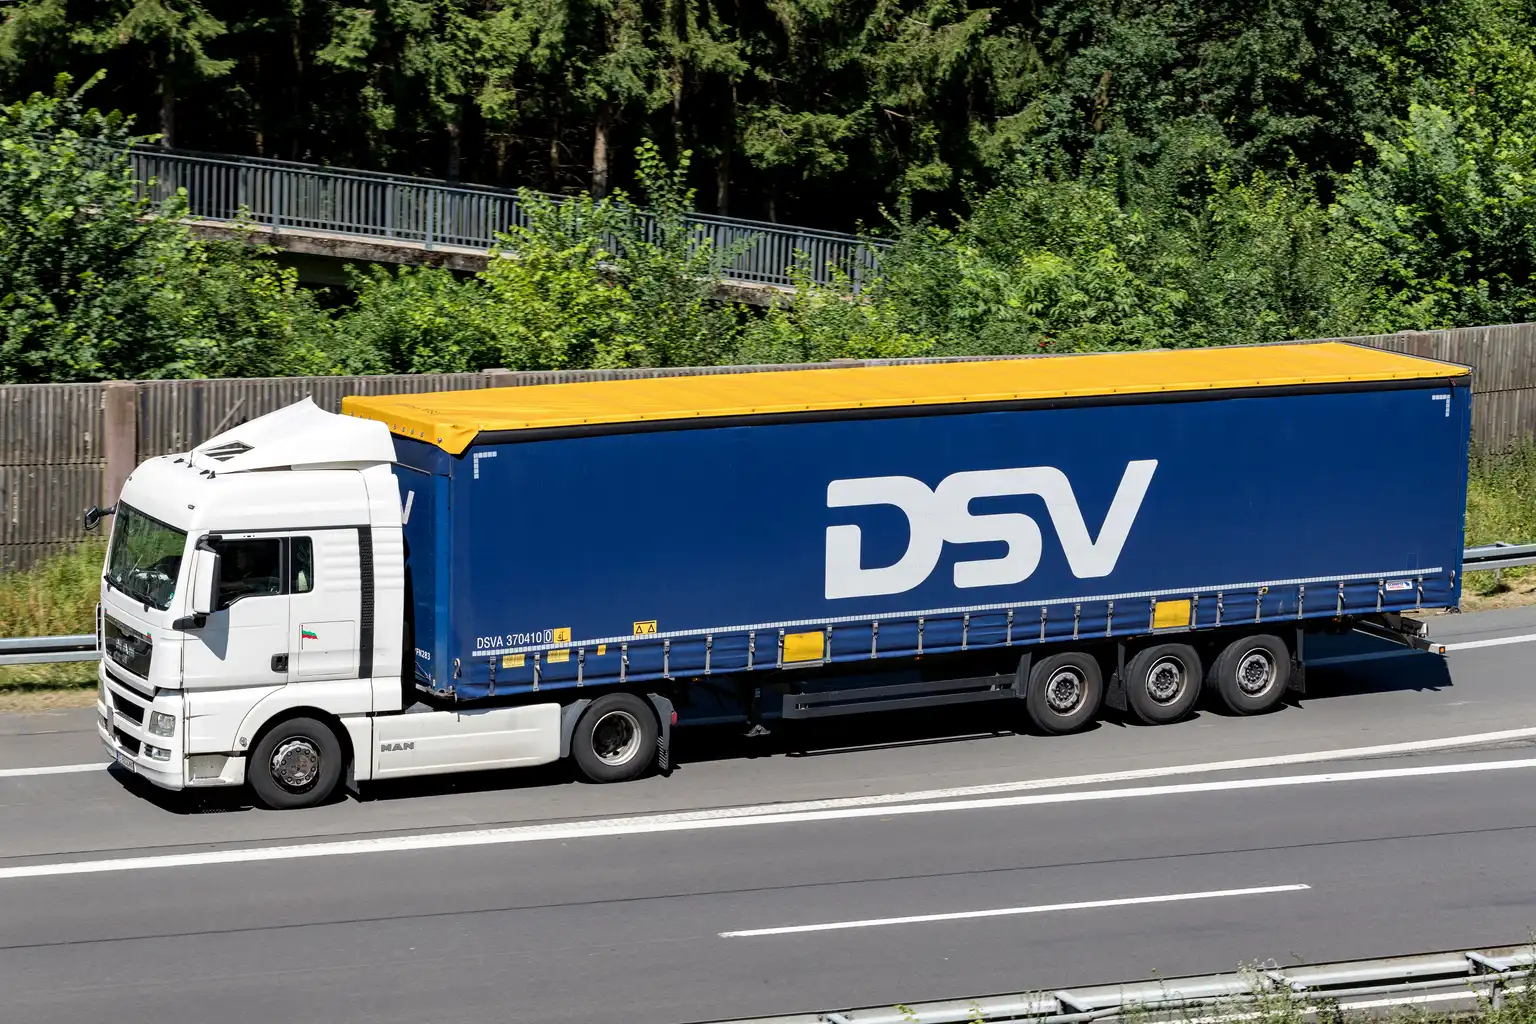 DSV A/S Undervalued In A Challenging Air, Sea And Road Market Environment - Seeking Alpha